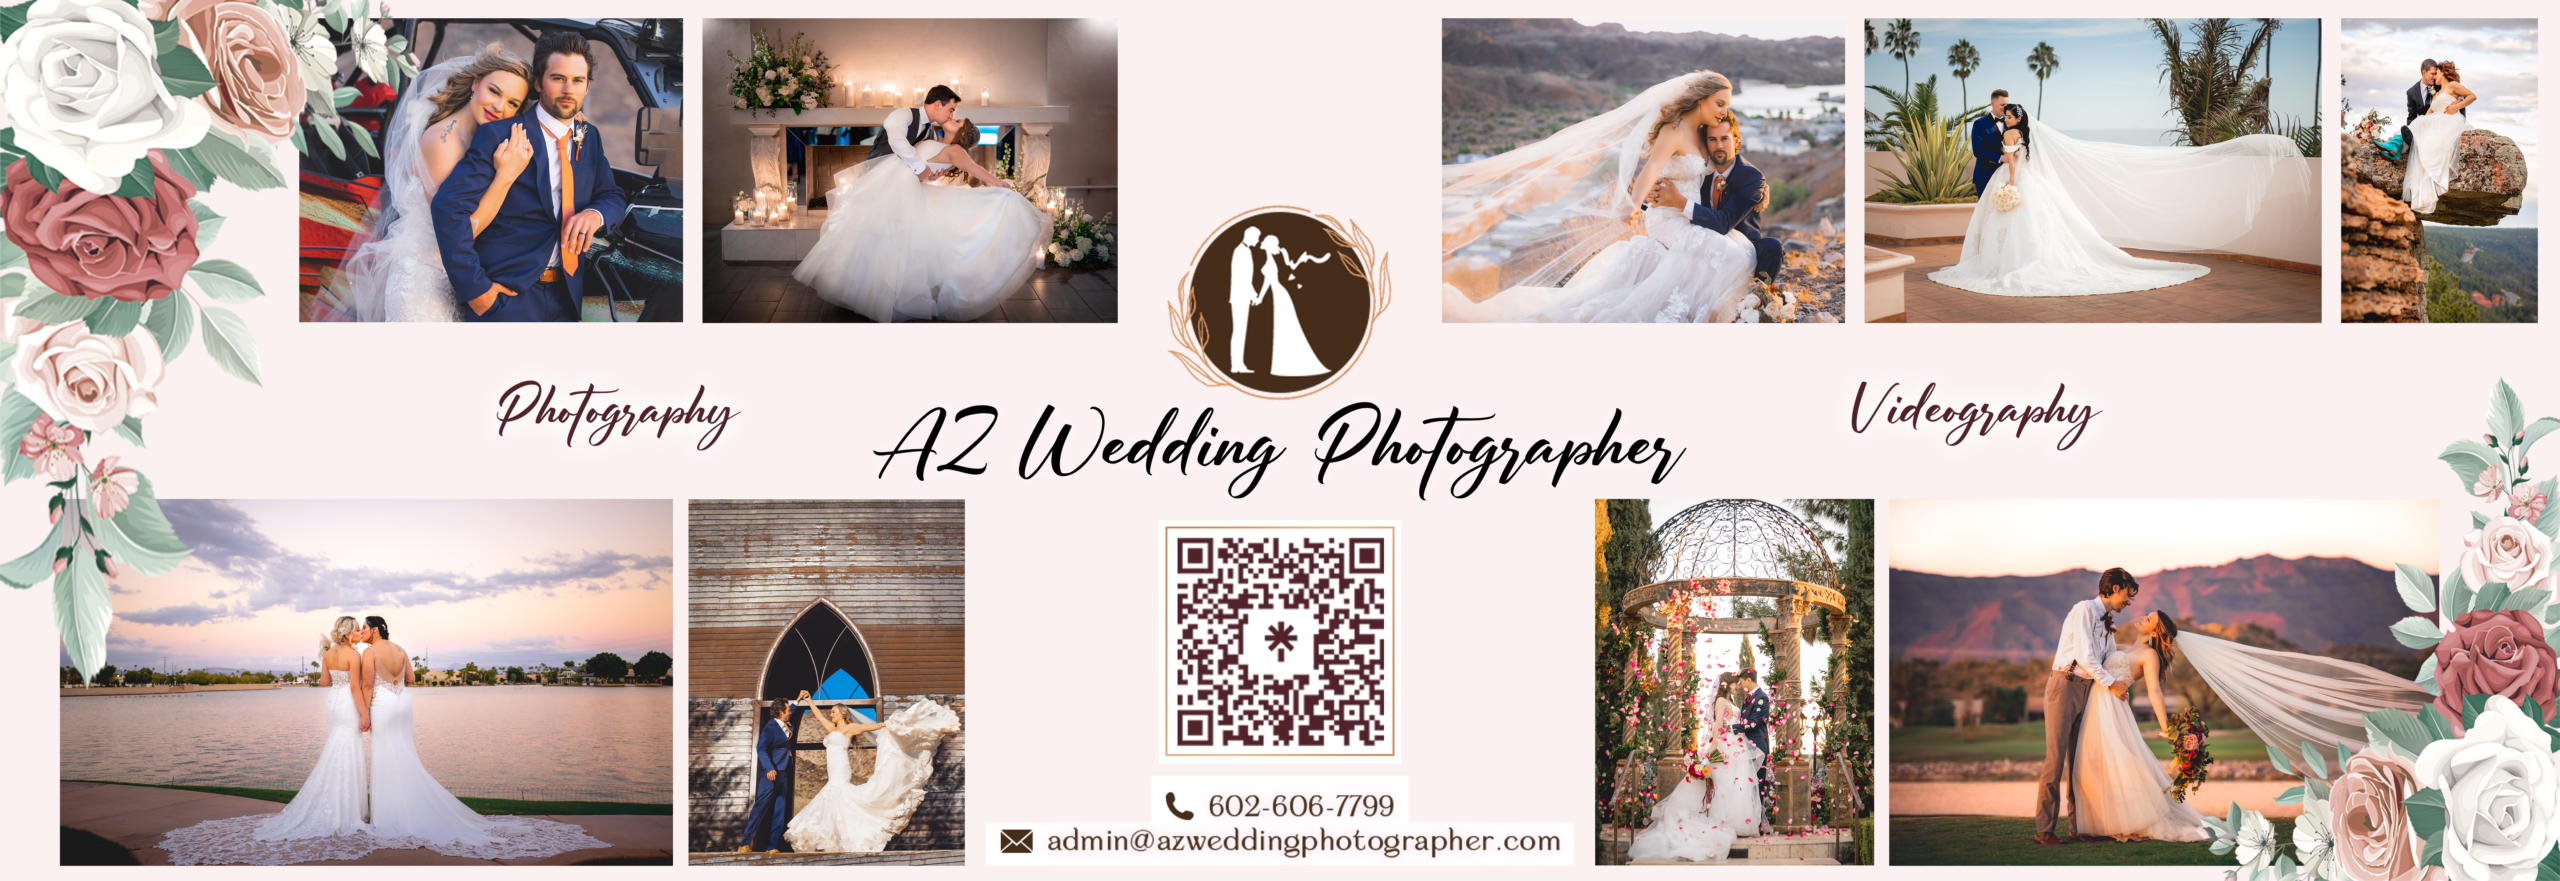 AZ Wedding Photographer capturing tender moments in Phoenix, Scottsdale, Gilbert, Chandler, Queen Creek - Professional photography and videography services.